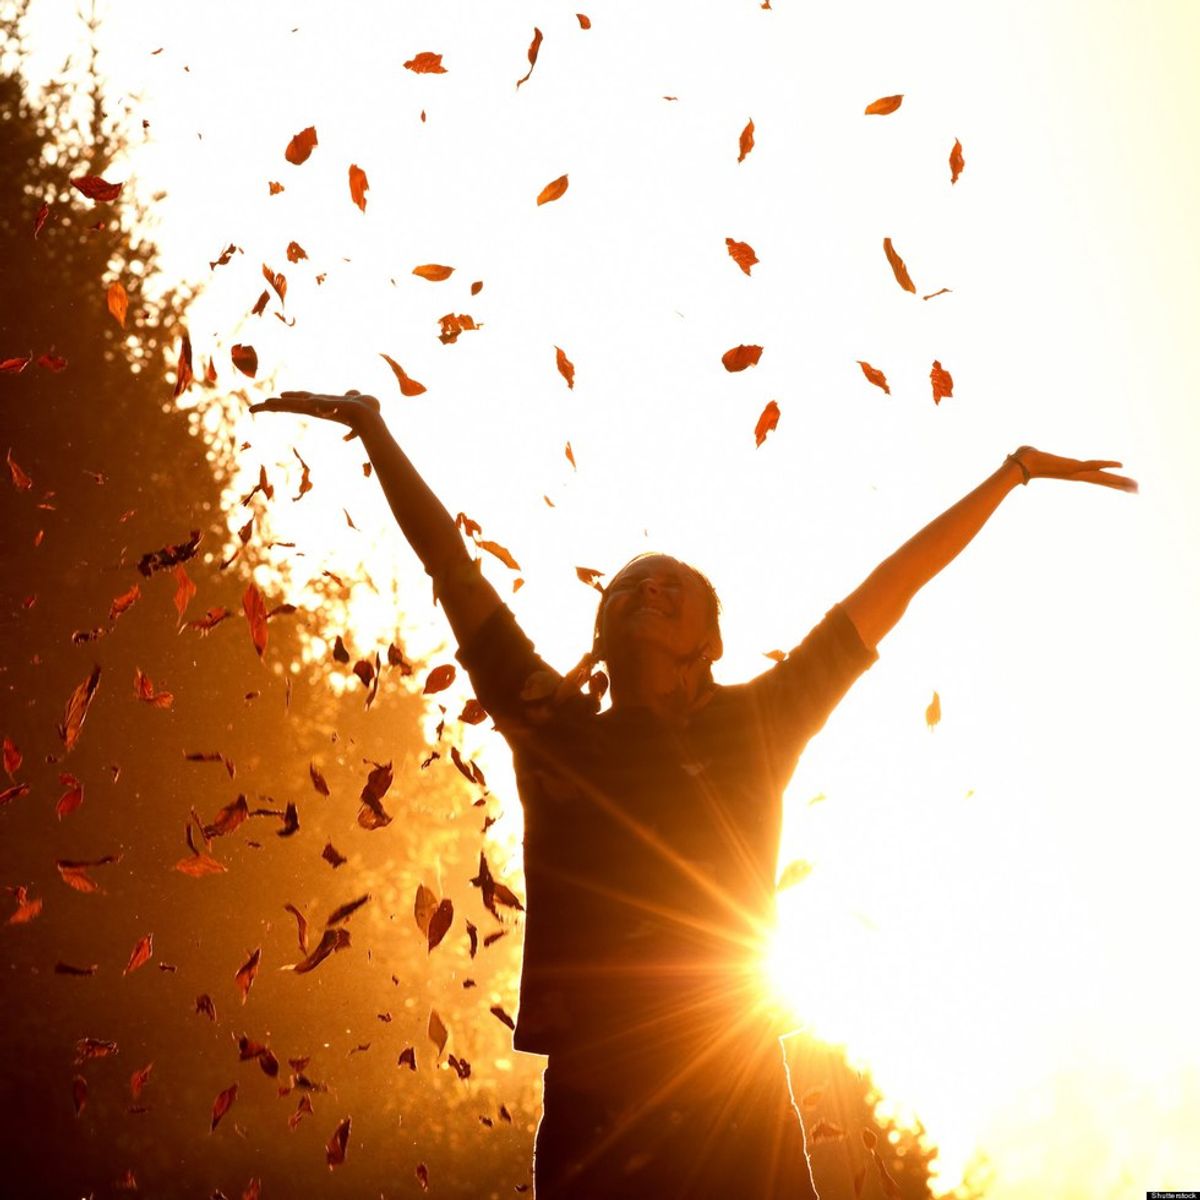 10 Proven Methods You Can Use to be 100% Happier